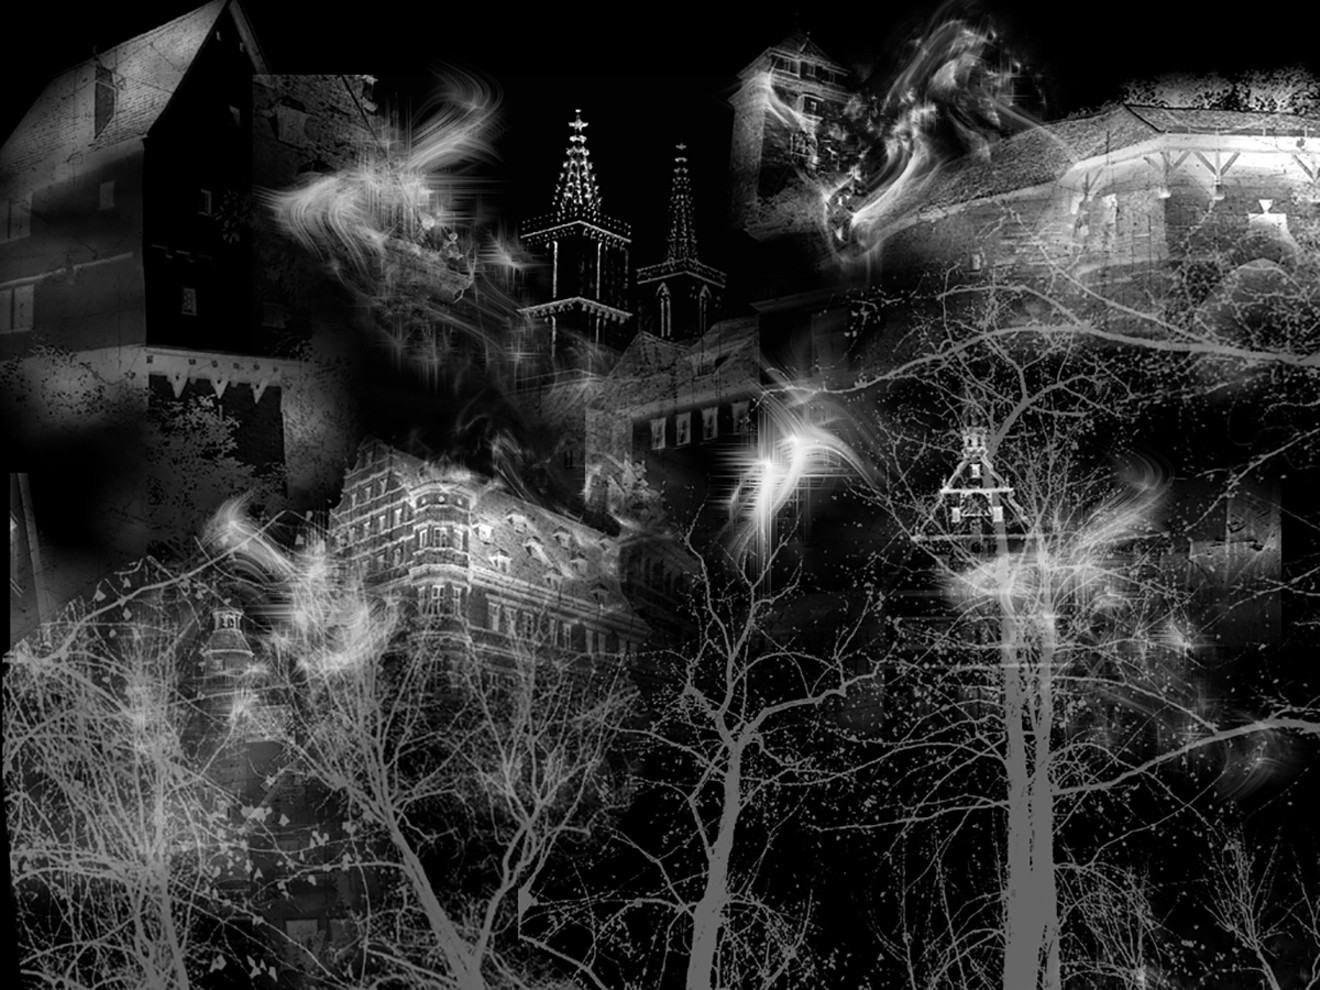 According to Houston Ghost Tour, Old Town Spring is the "sixth most haunted town in Old West USA," a spooky place where orbs, doll parts and ghost trains can be found.